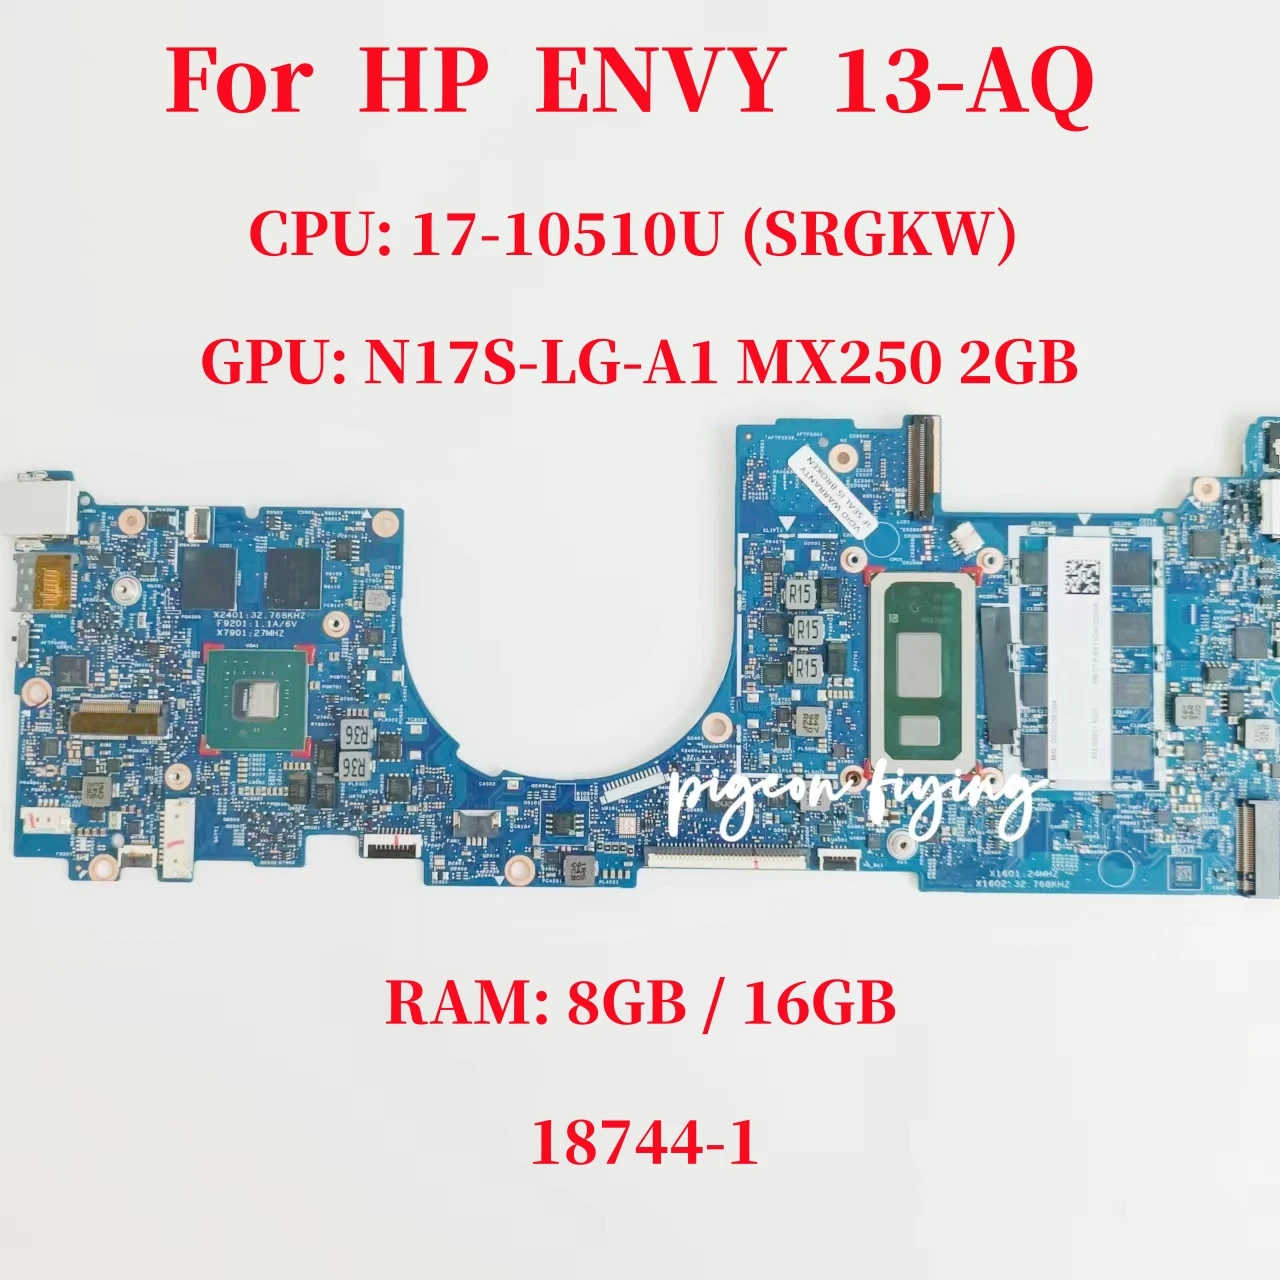 

18744-1 Mainboard For HP ENVY 13-AQ Laptop Motherboard CPU:I7-10510U SRGKW GPU:MX250 2G RAM:8G/16G L63127-601 L63126-601 Test OK